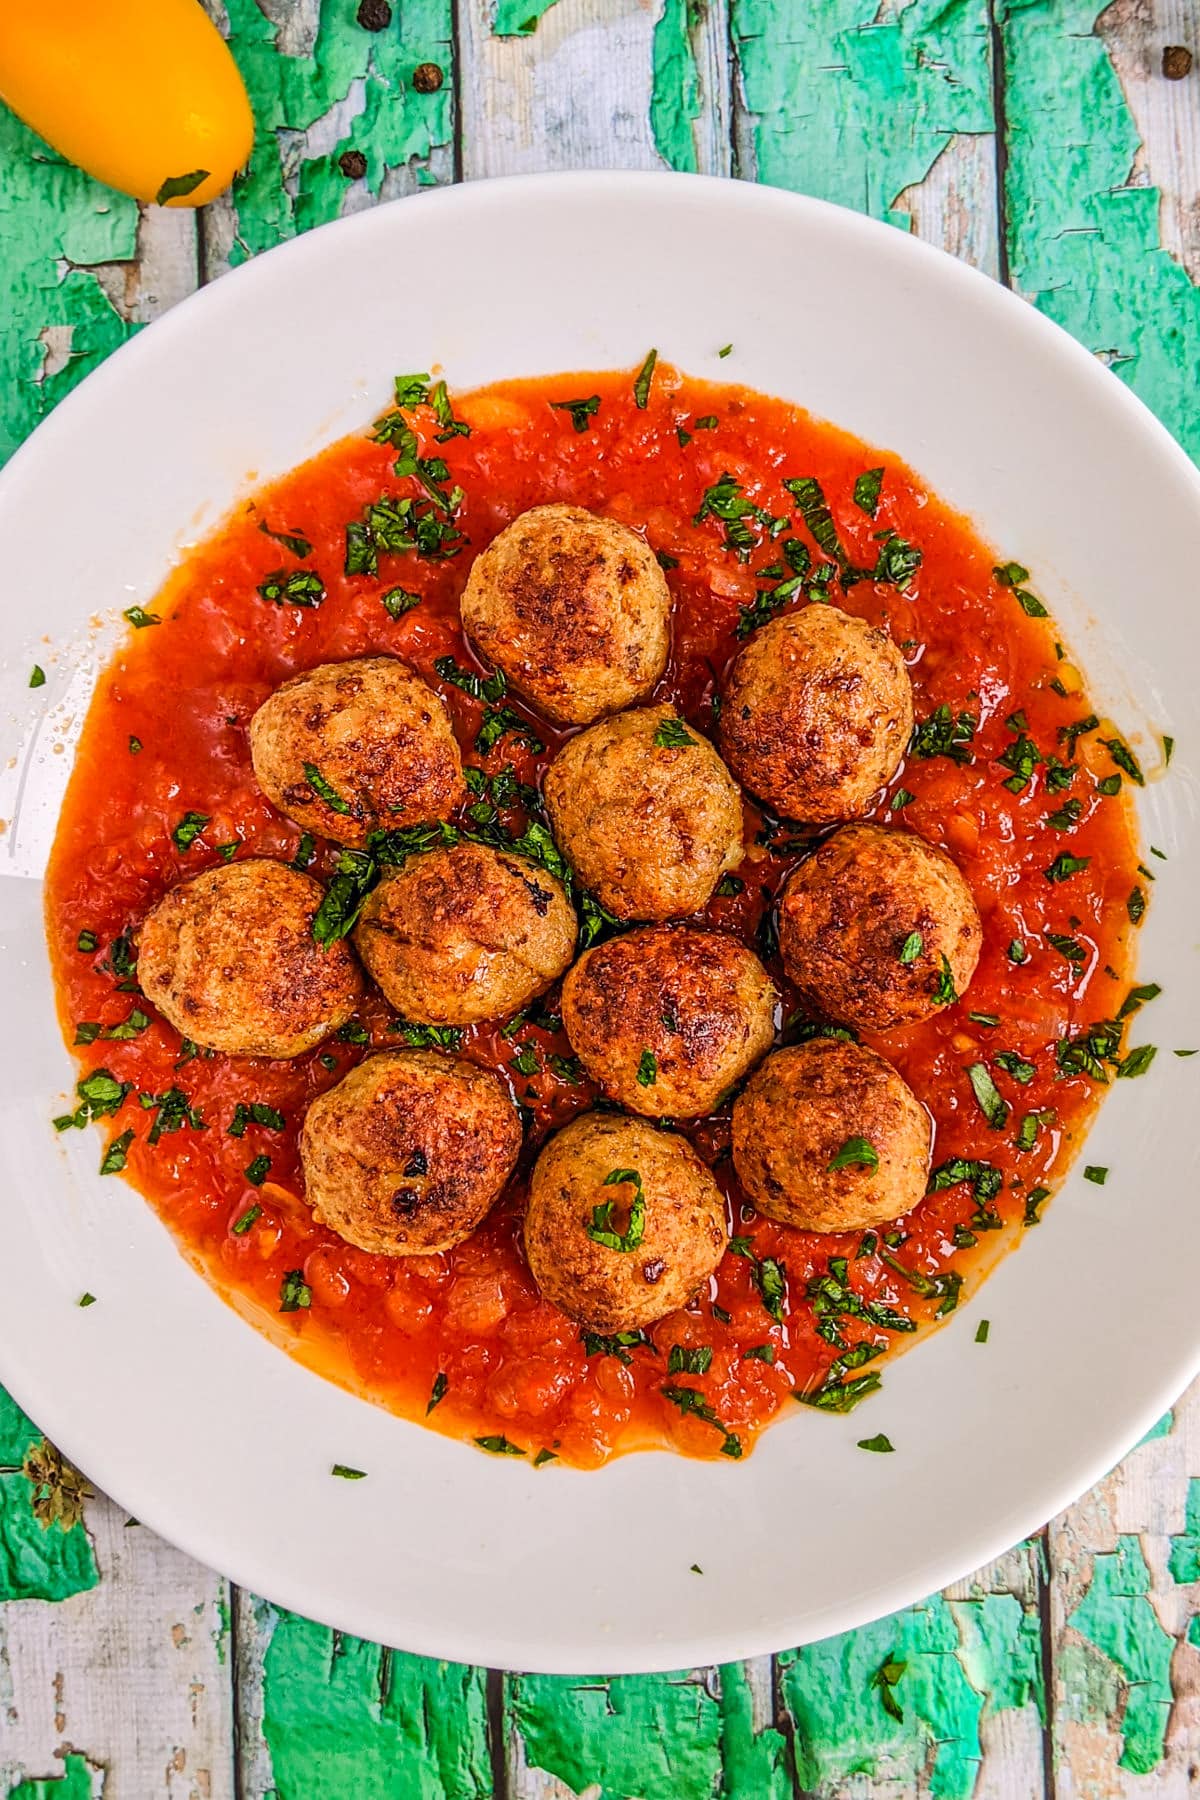 Top view of a plate with chicken meatballs with tomato sauce.